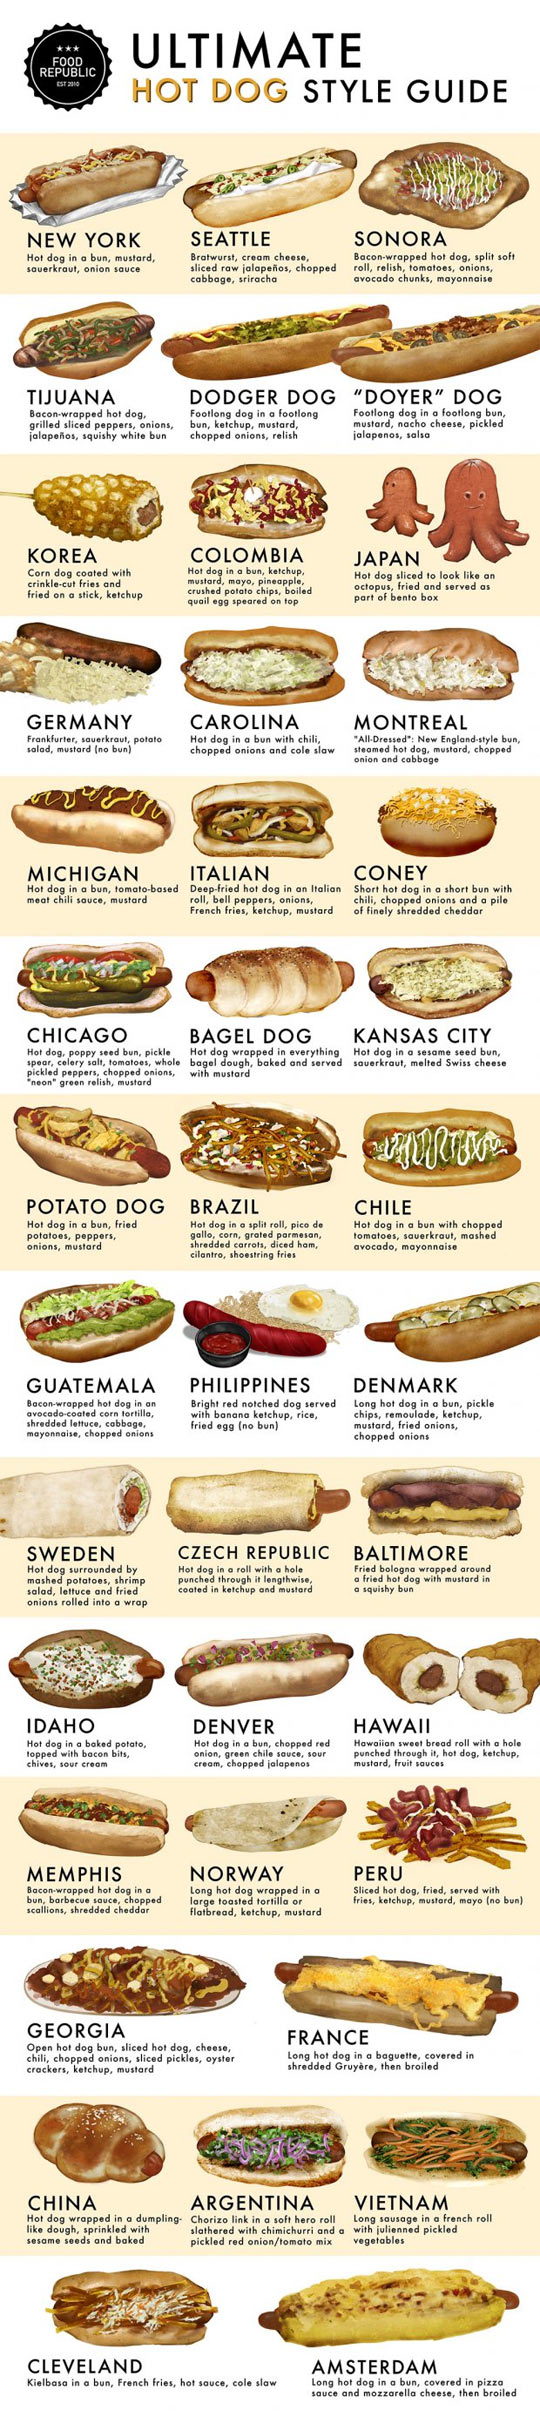 funny-wiener-countries-style-guide